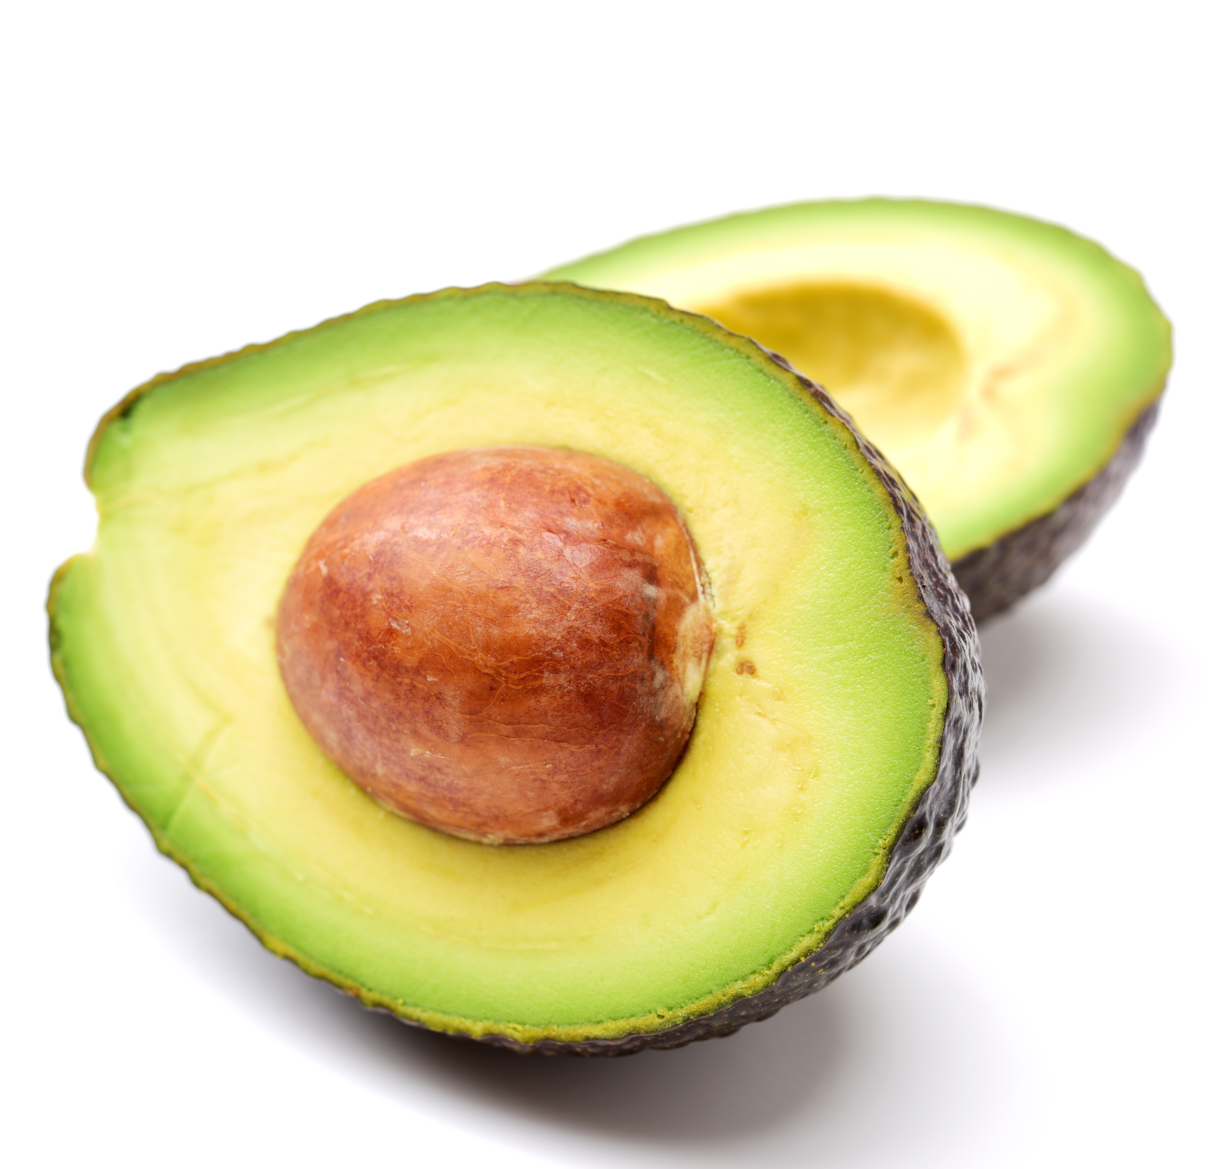 Avocados are found to have the lowest pesticide residual according to the EWG 2023 Studies.